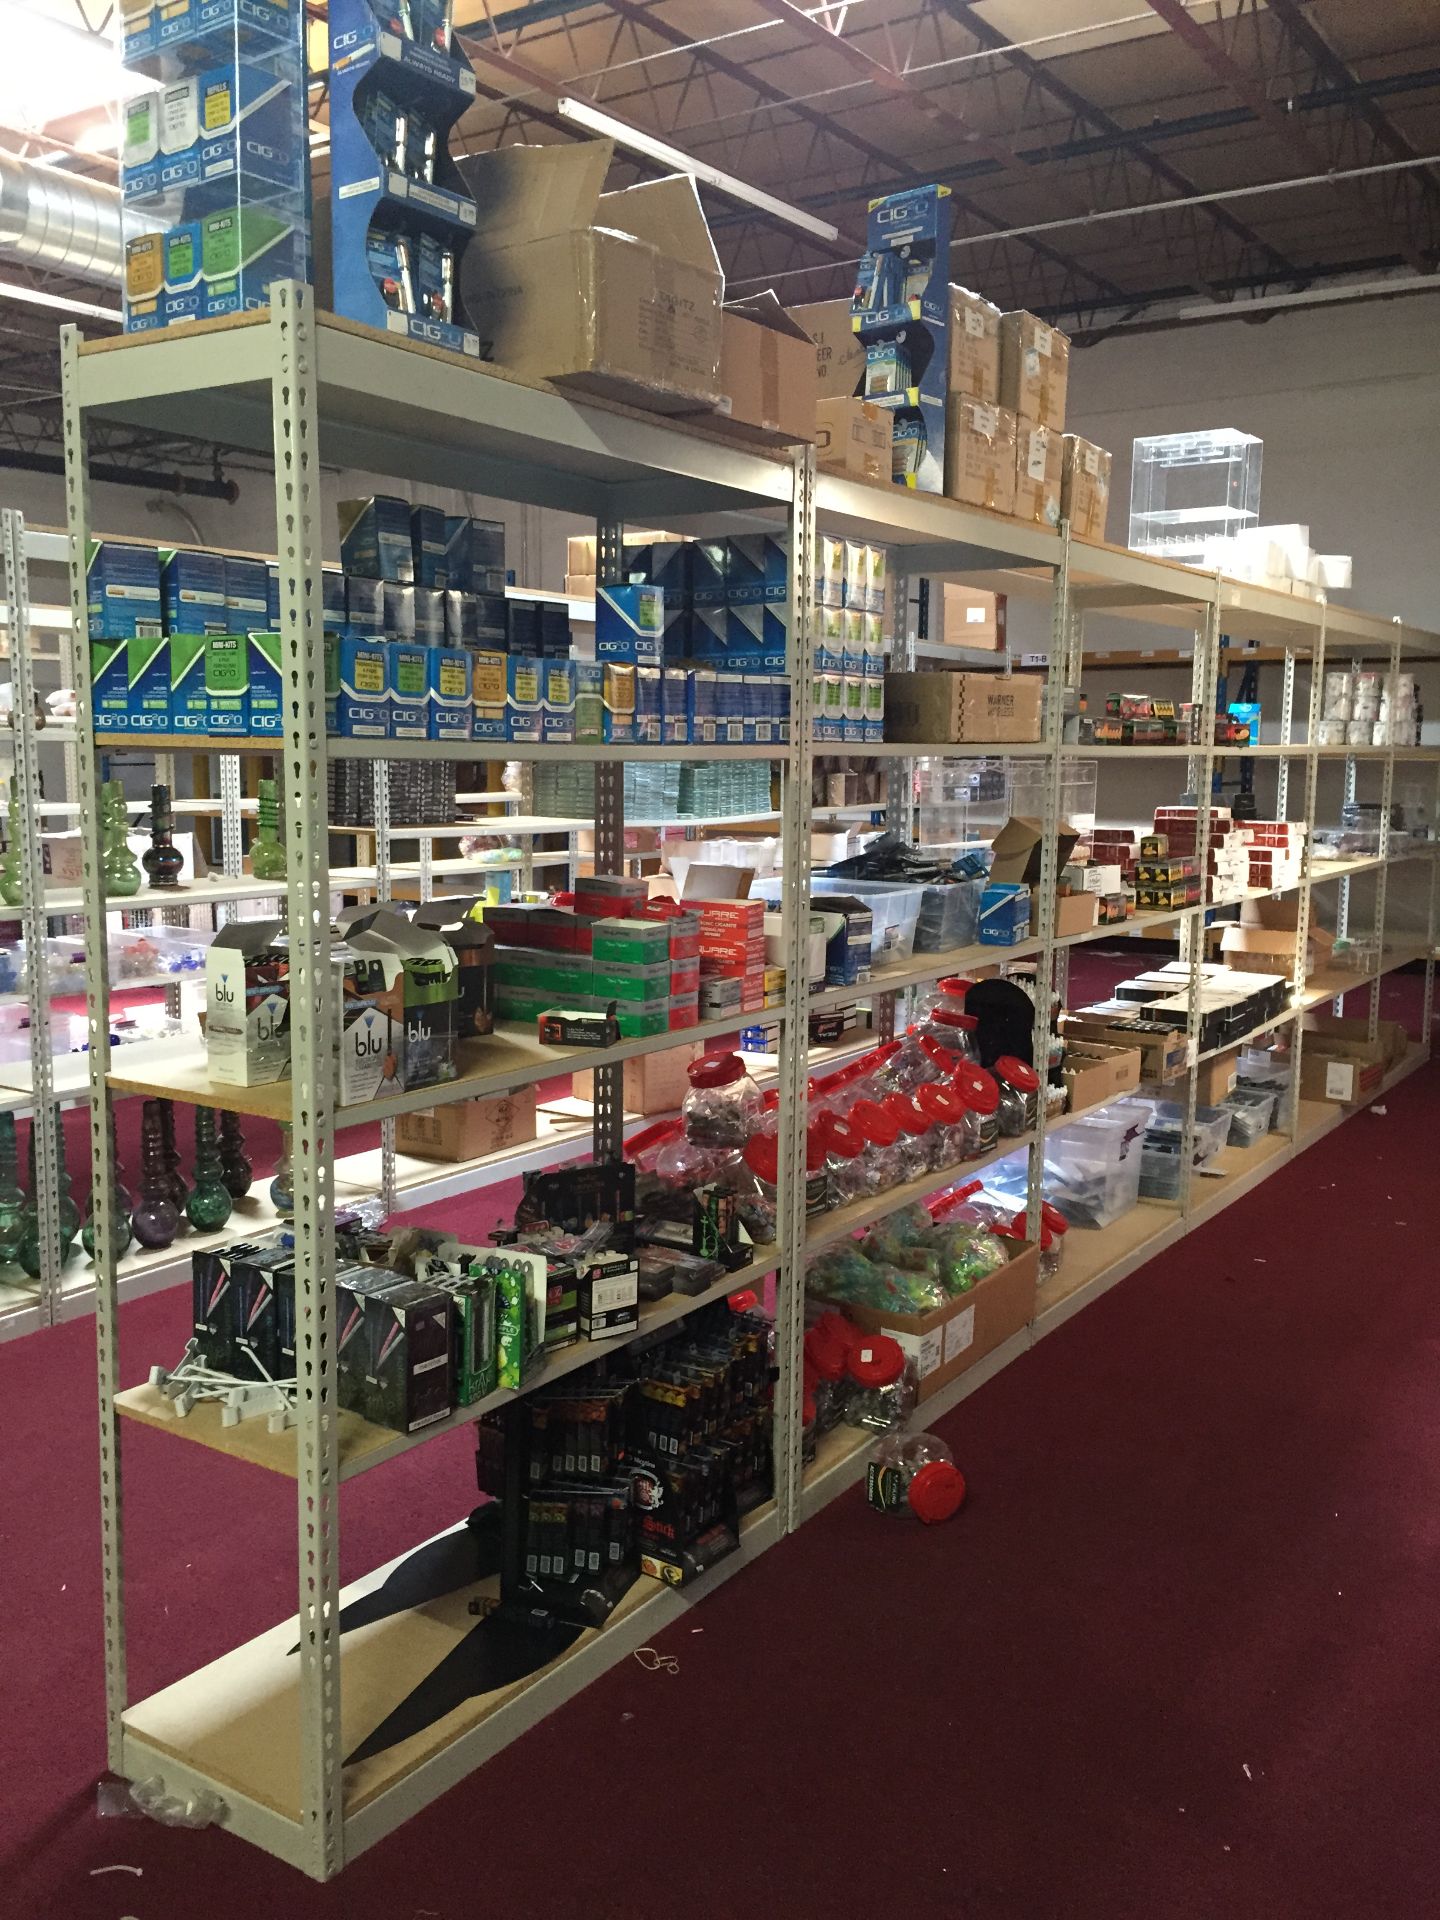 ONE LOT OF 10 SECTIONS OF RIVETIER INDUSTRIAL SHELVING,  EACH SIZE 18"D X 48"W X 84"H, COLOR: - Image 2 of 5